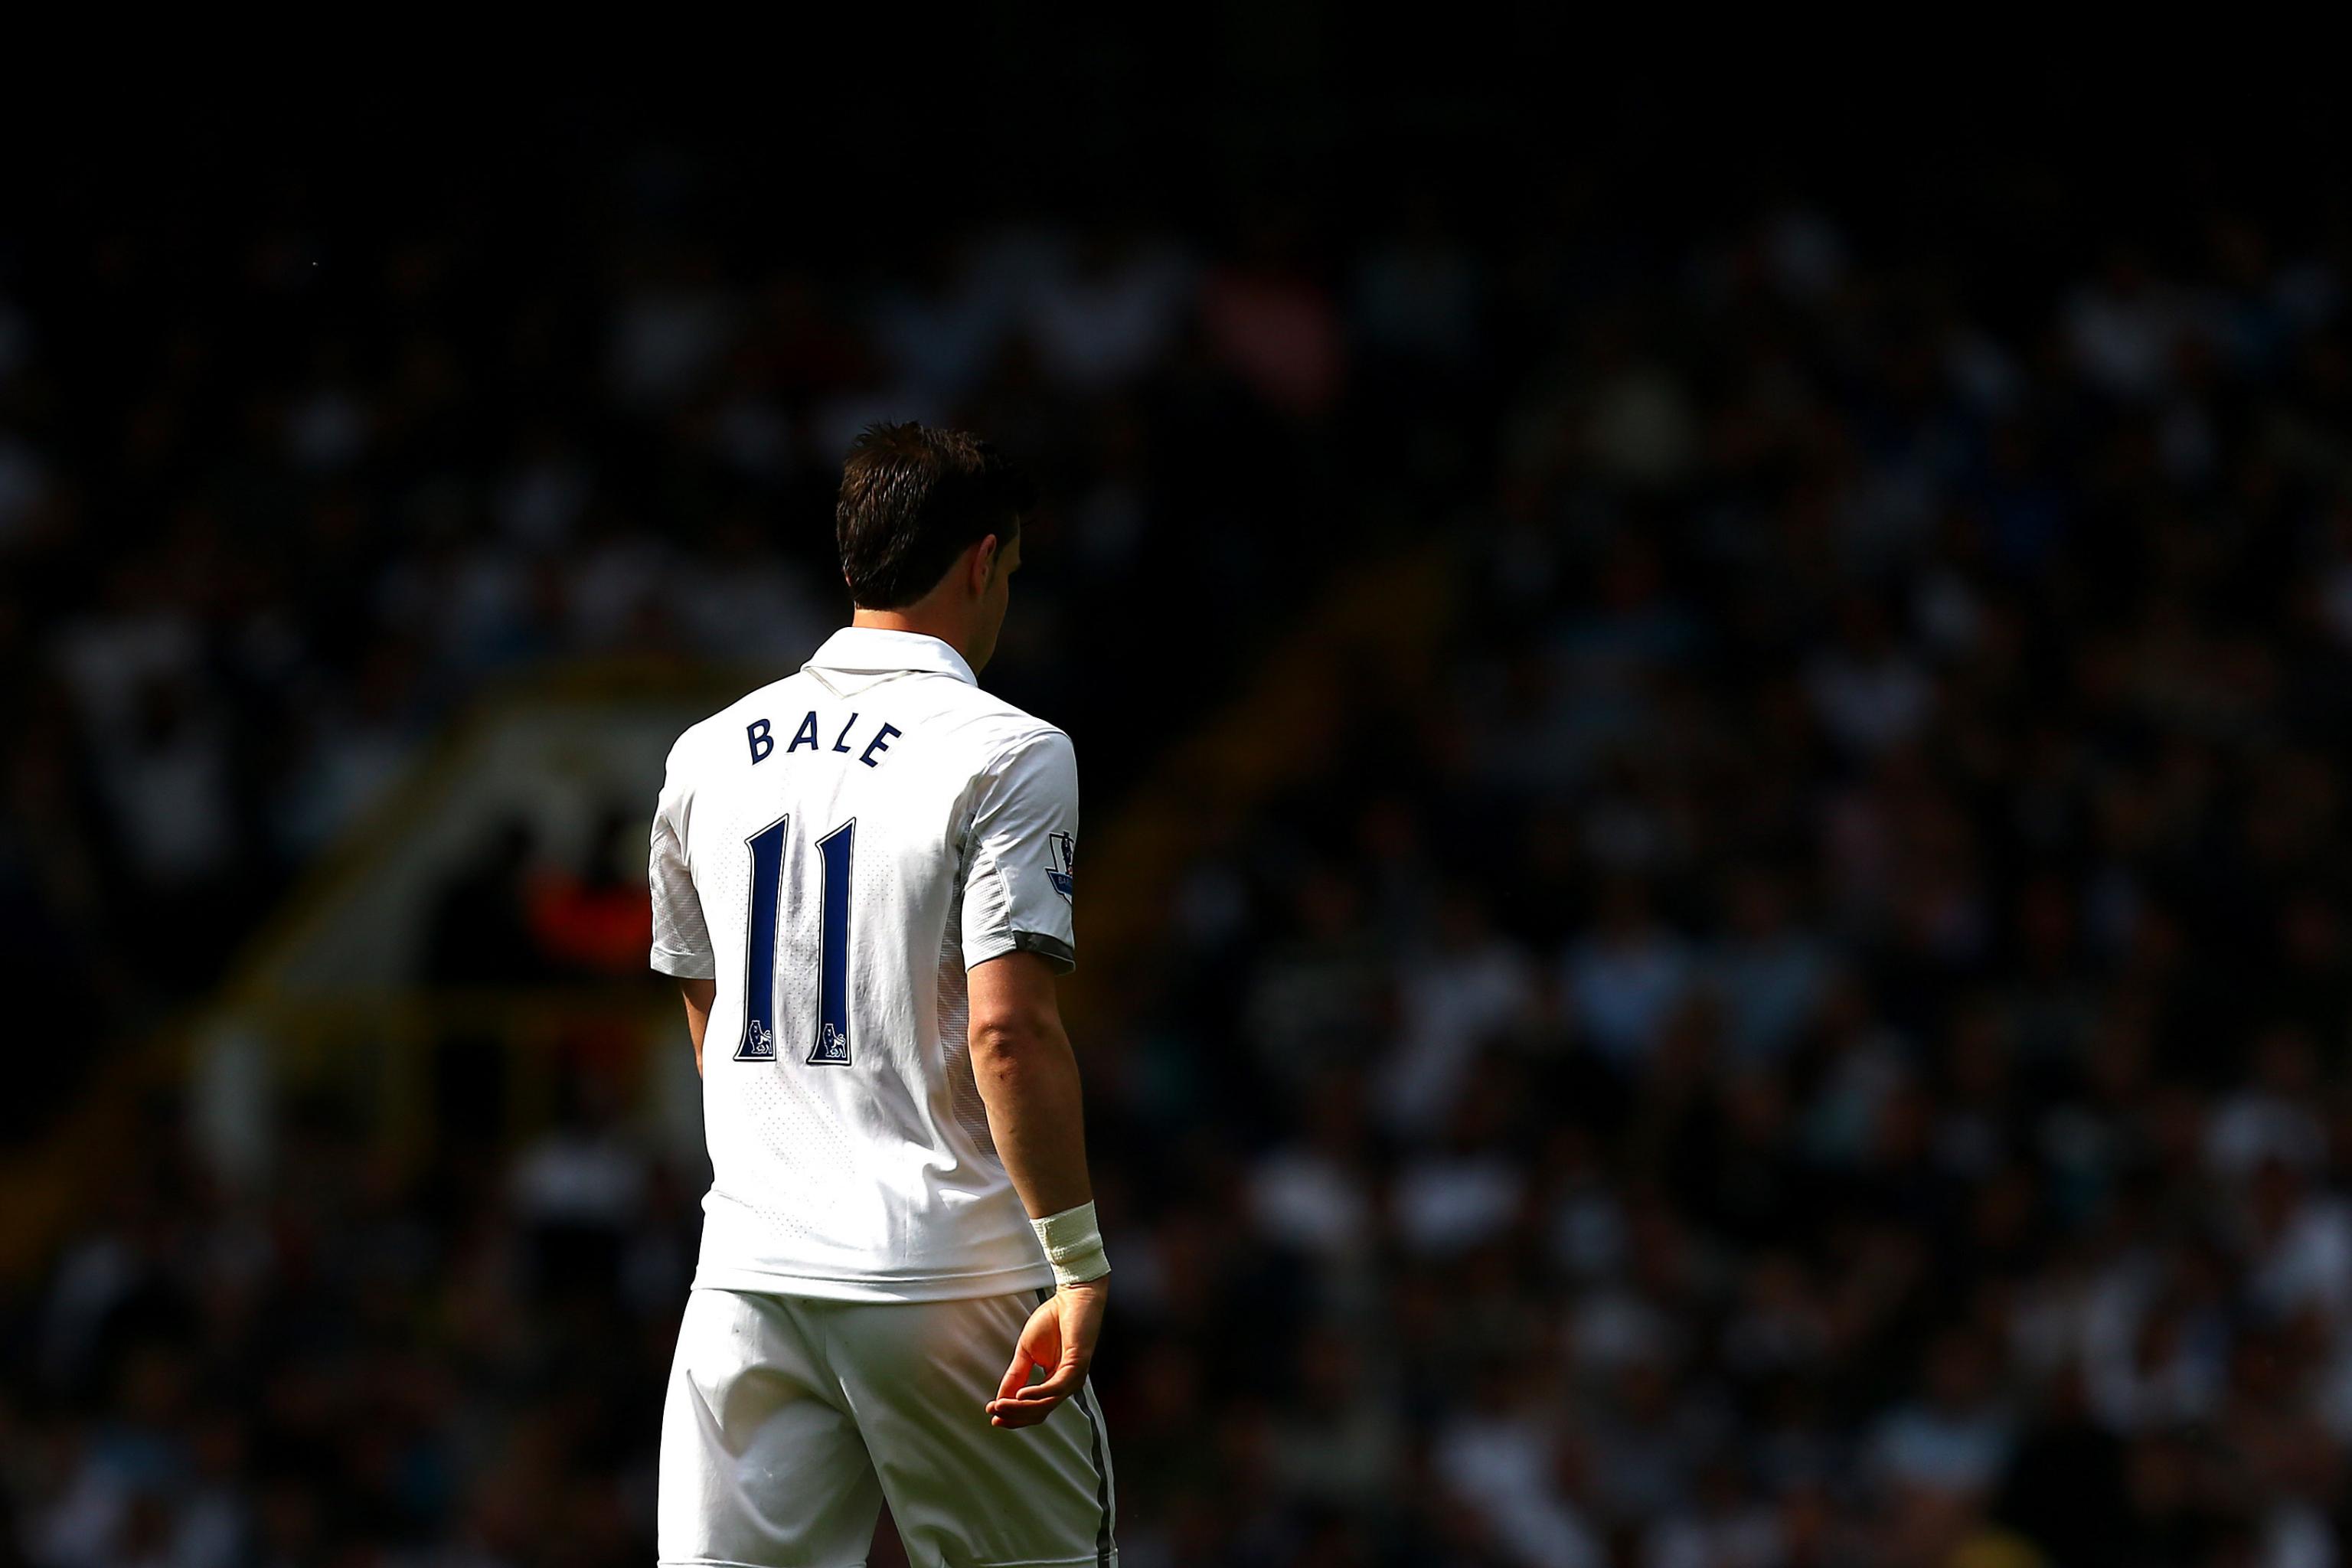 Gareth Bale wants more minutes – but a second season at Spurs looks unlikely